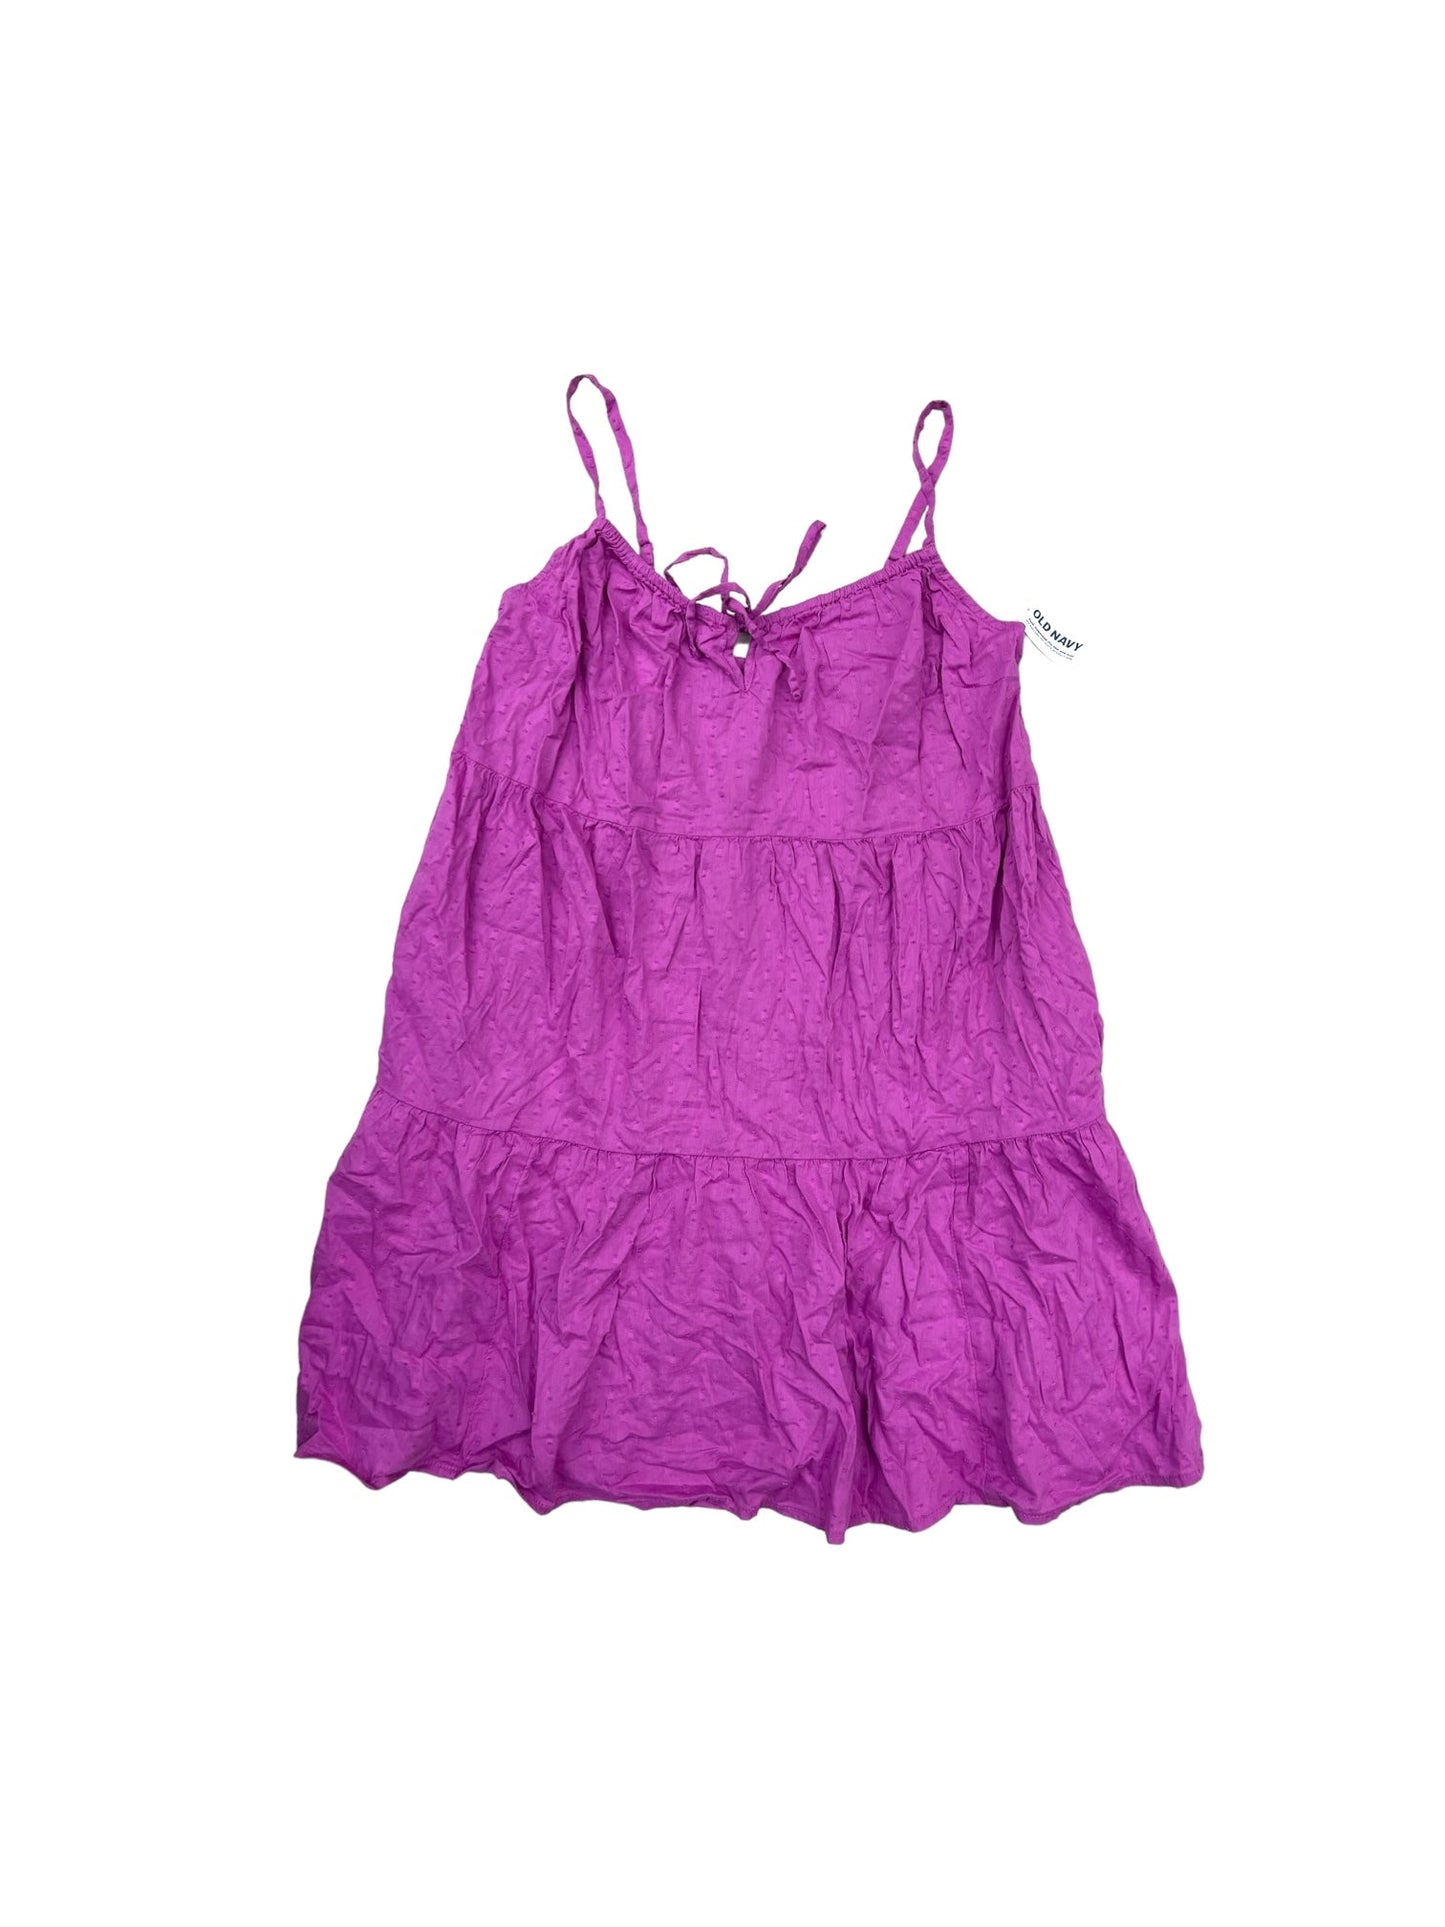 Purple Dress Casual Short Old Navy, Size Xs